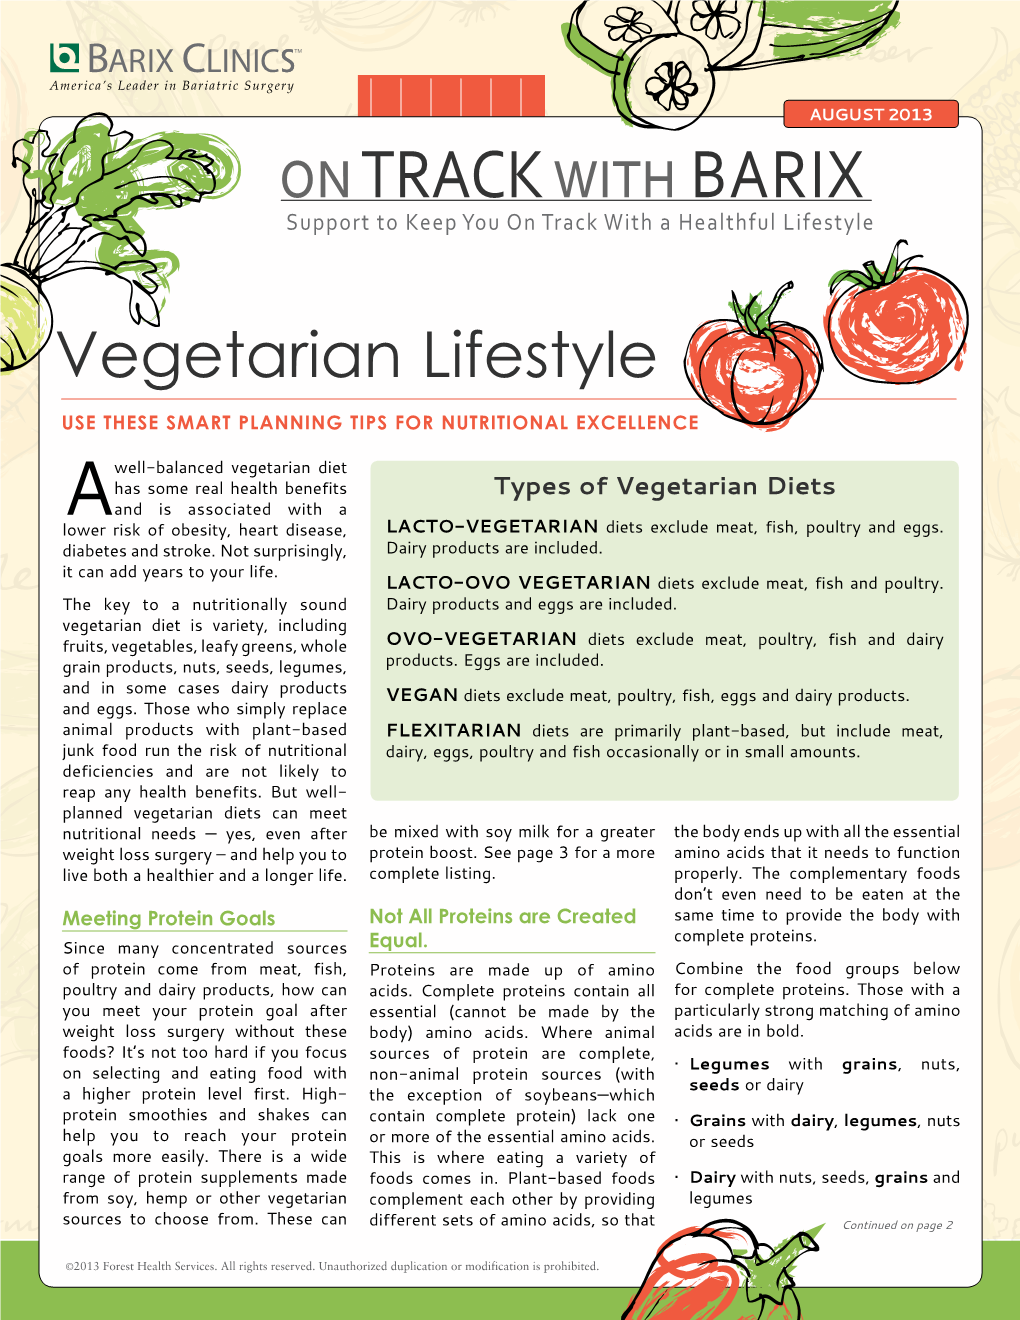 Vegetarian Lifestyle Use These Smart Planning Tips for Nutritional Excellence